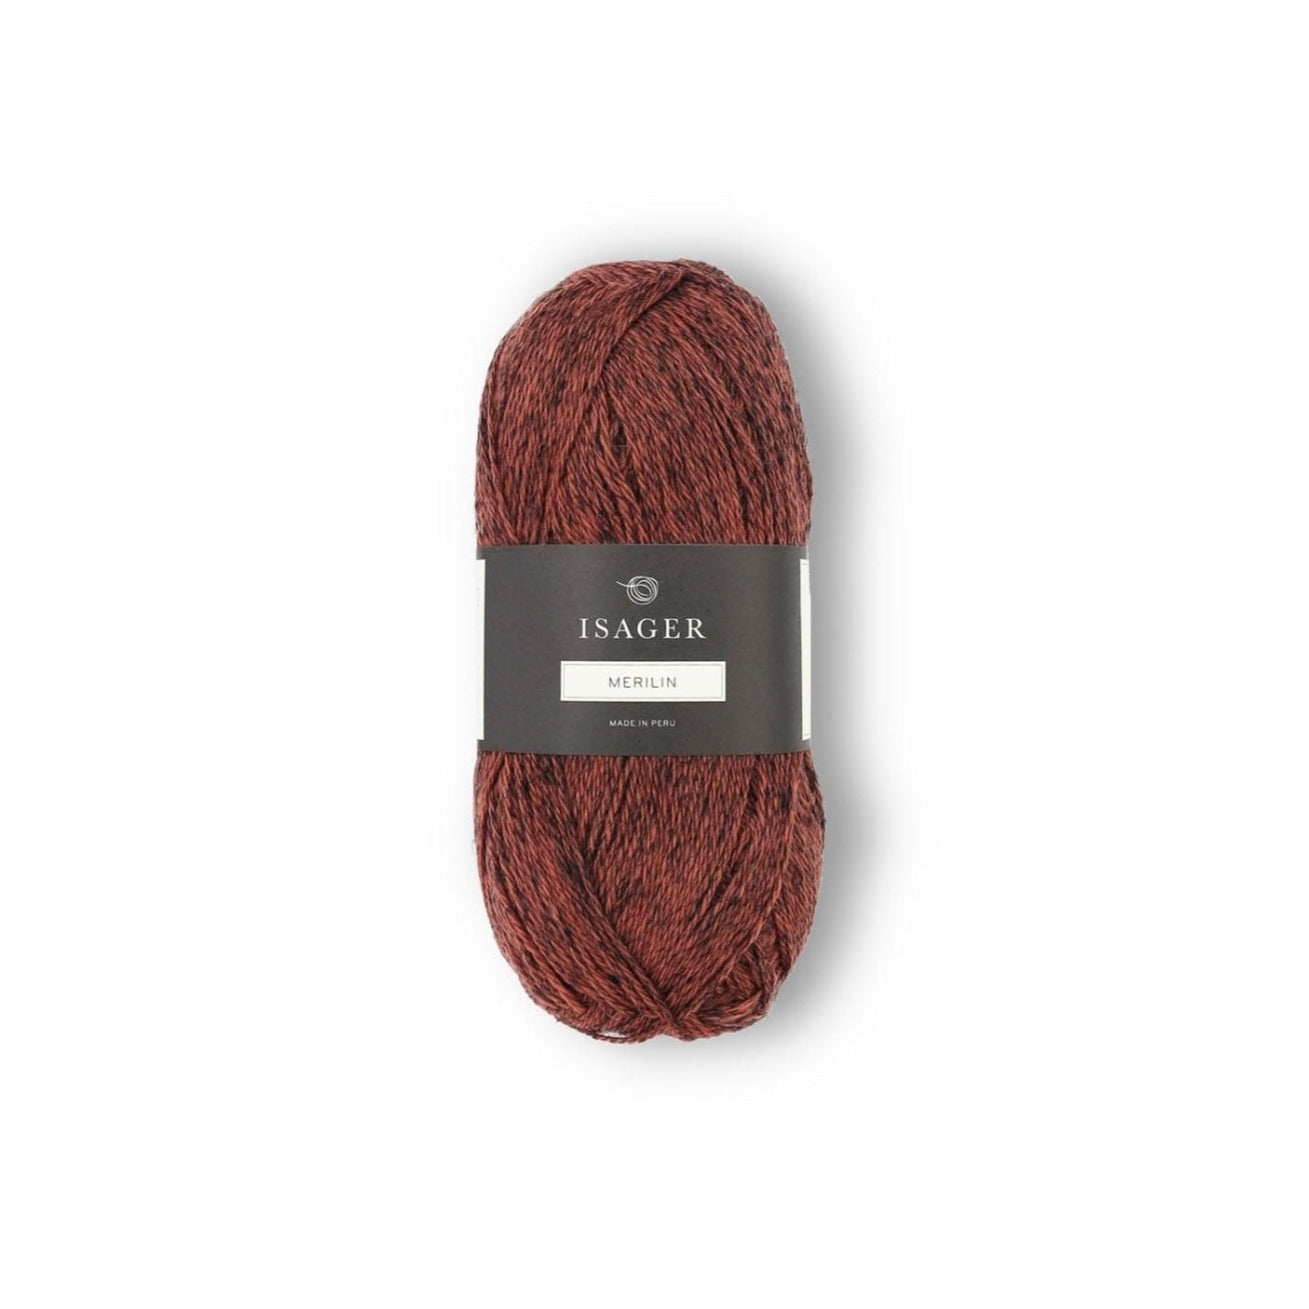 Isager Merilin - 1s - 3 Ply - Isager - The Little Yarn Store